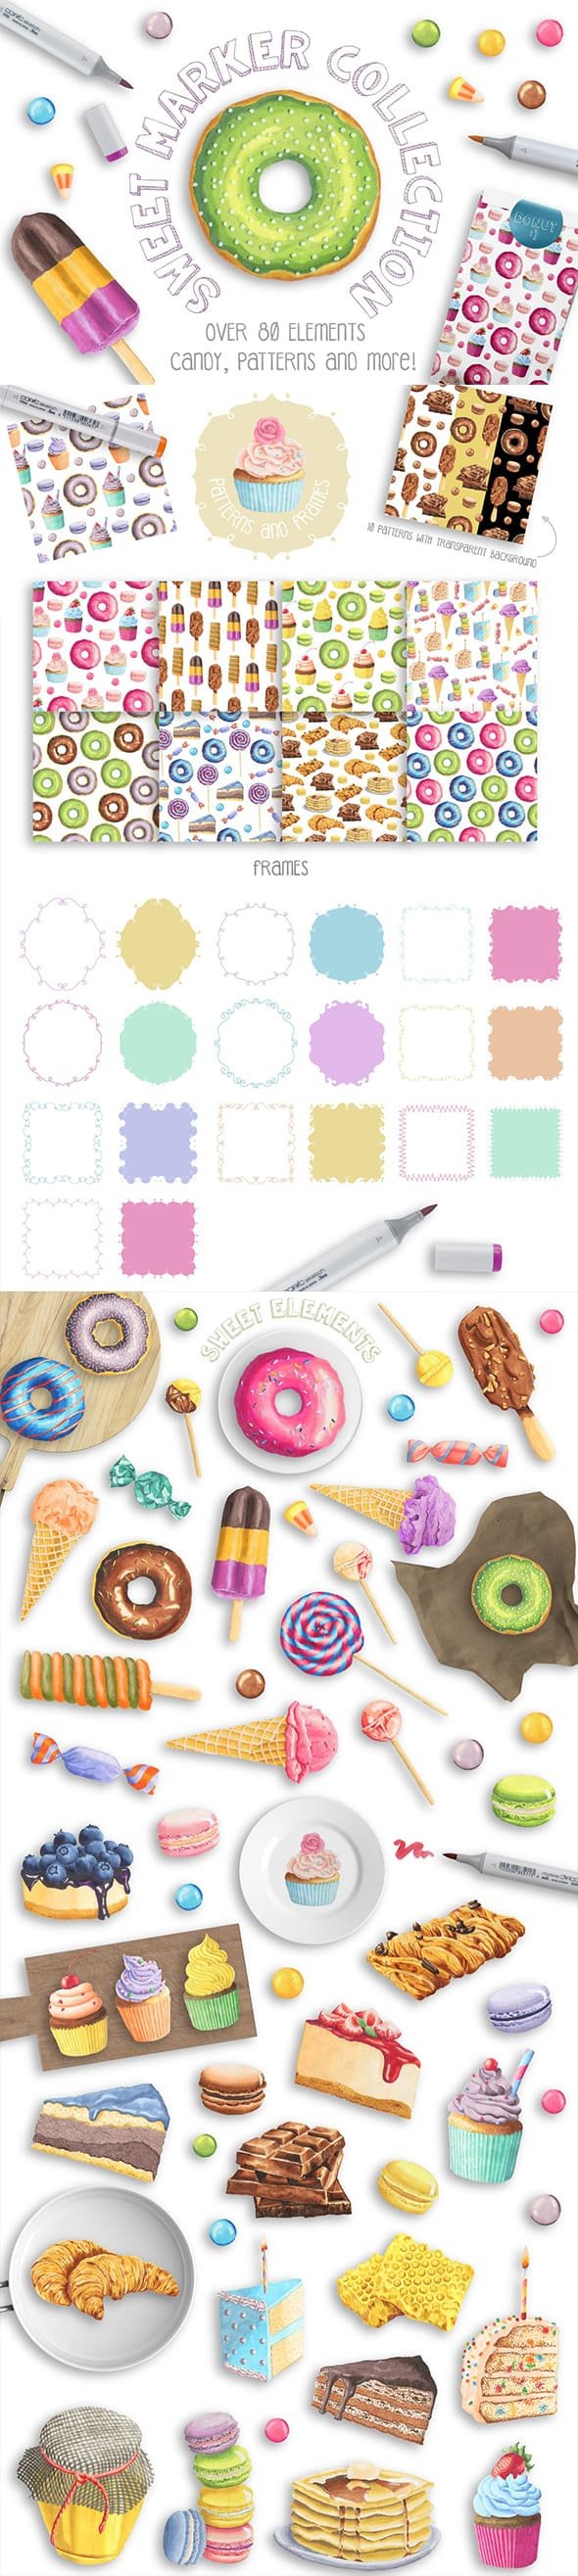 CreativeMarket - Sweet Marker Collection - 611182